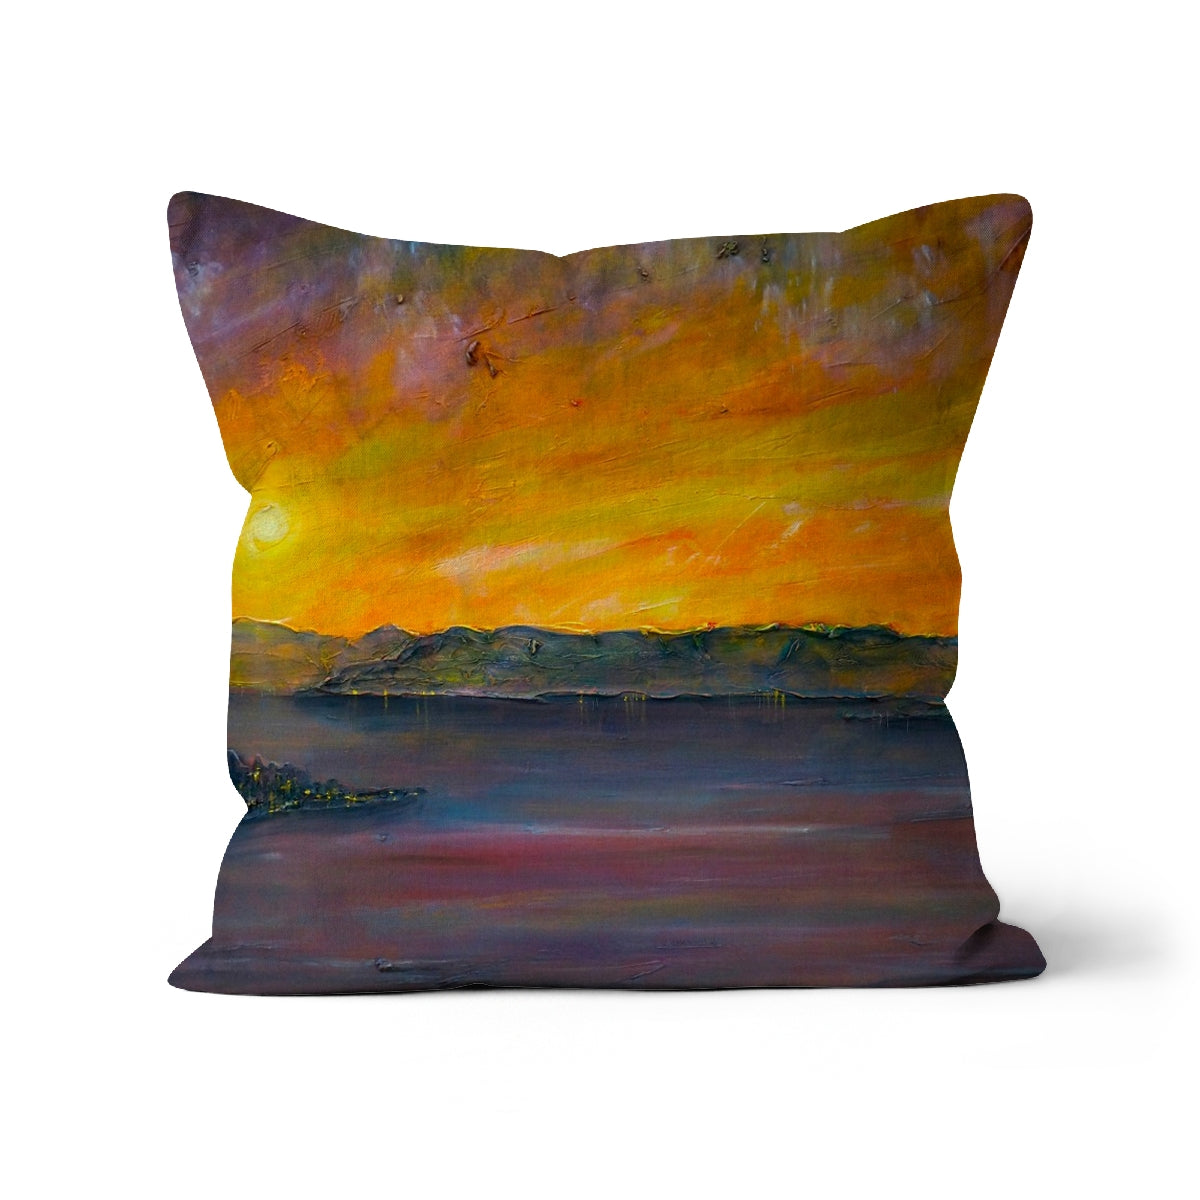 Sunset Over Gourock Art Gifts Cushion-Cushions-River Clyde Art Gallery-Canvas-22"x22"-Paintings, Prints, Homeware, Art Gifts From Scotland By Scottish Artist Kevin Hunter